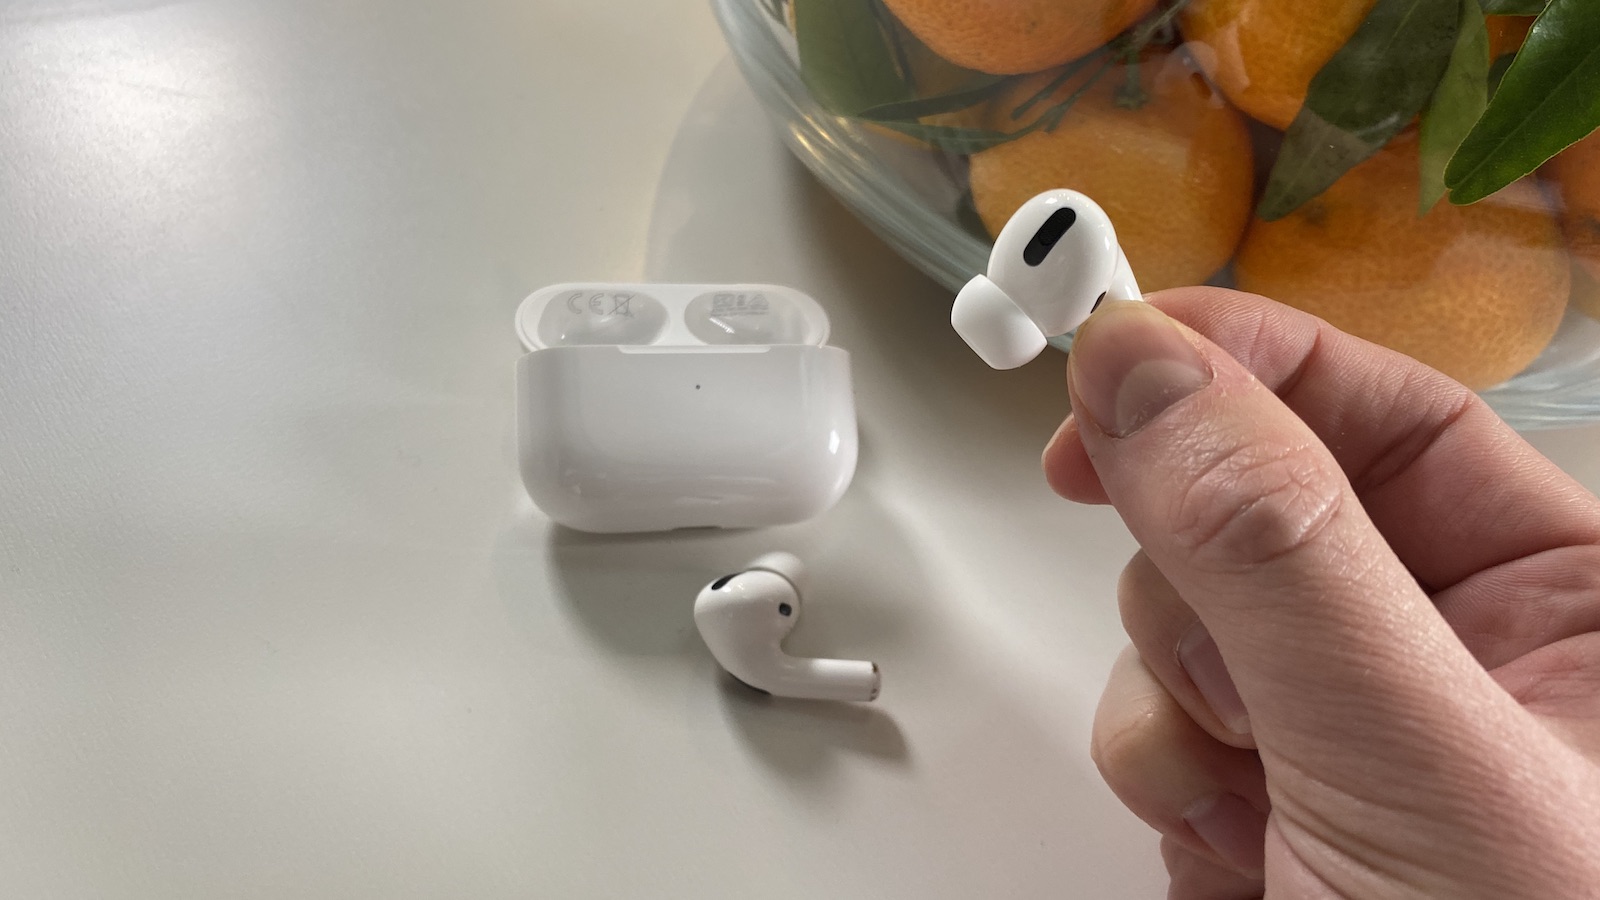 Walmart Black Friday deals: Apple AirPods Pro down to $219 | What Hi-Fi?